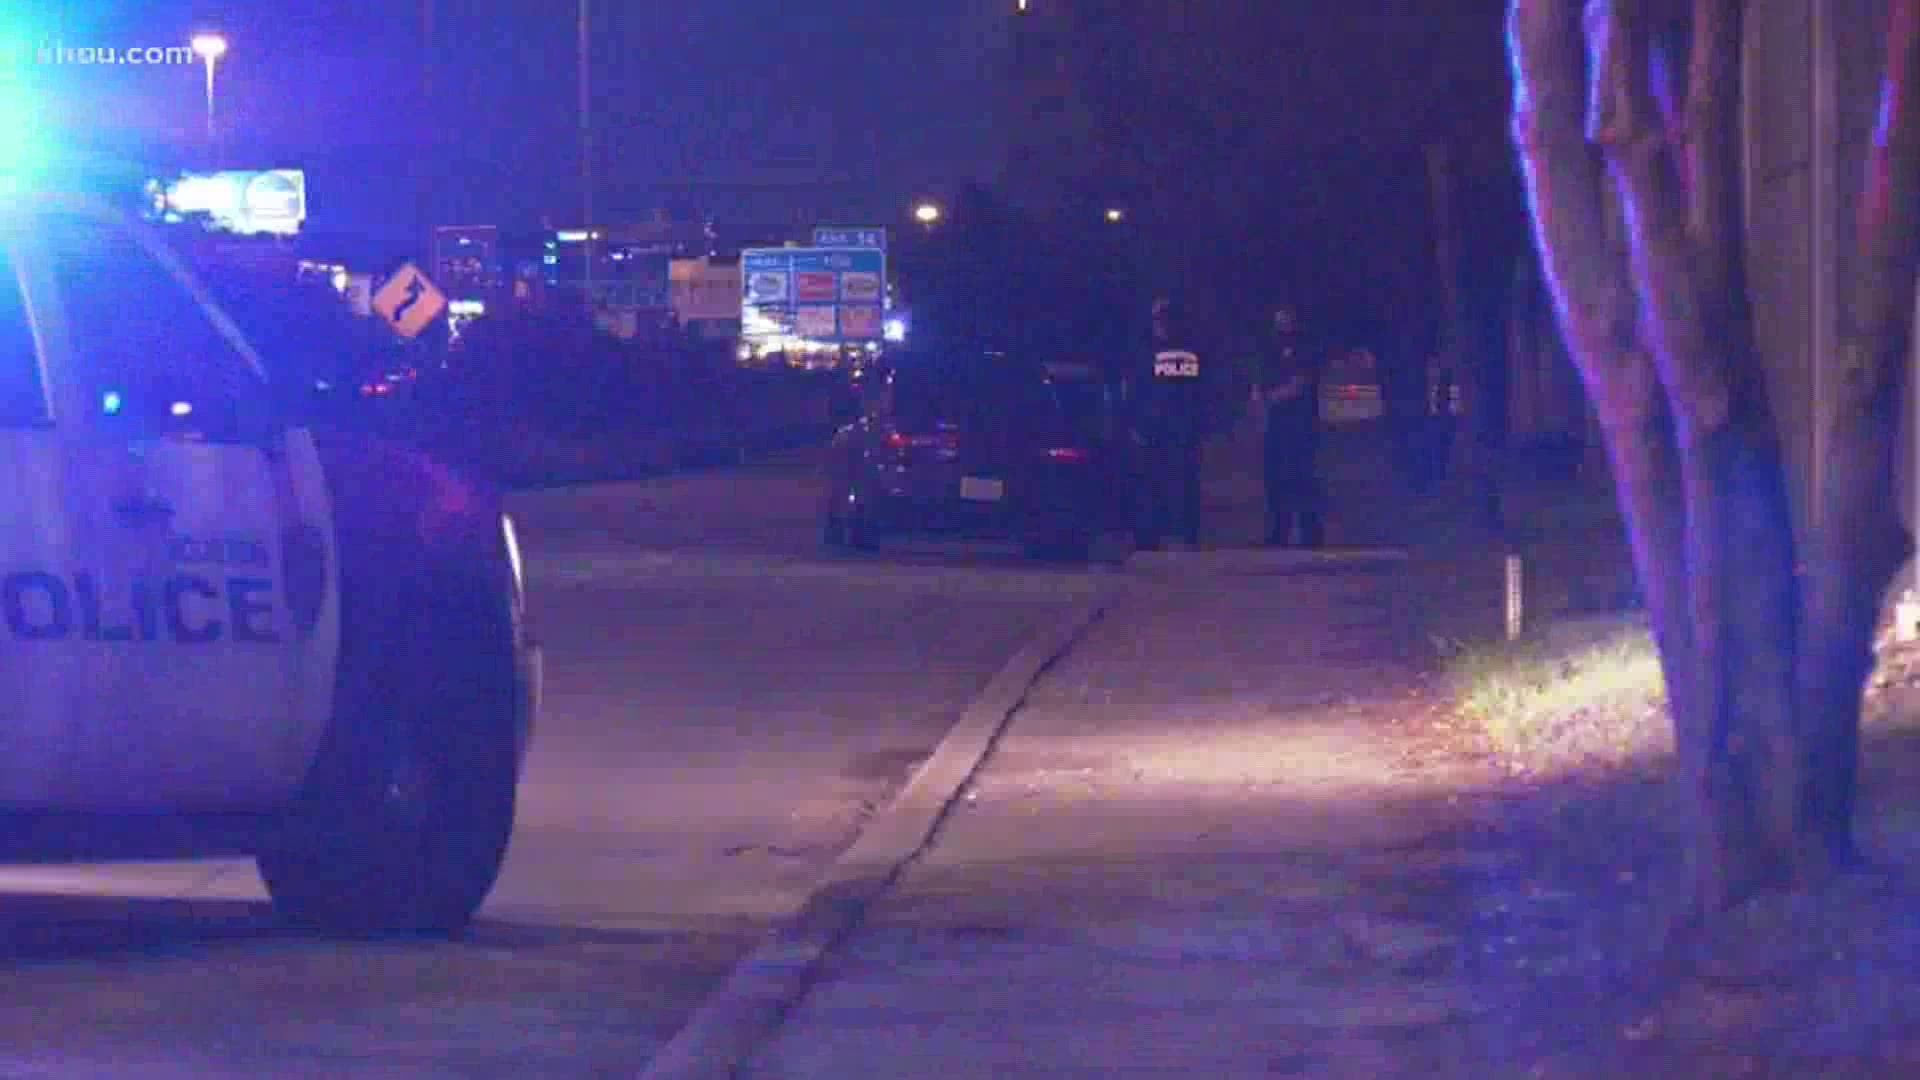 A man was shot and killed late Sunday night in an apparent road rage incident, according to Houston police.